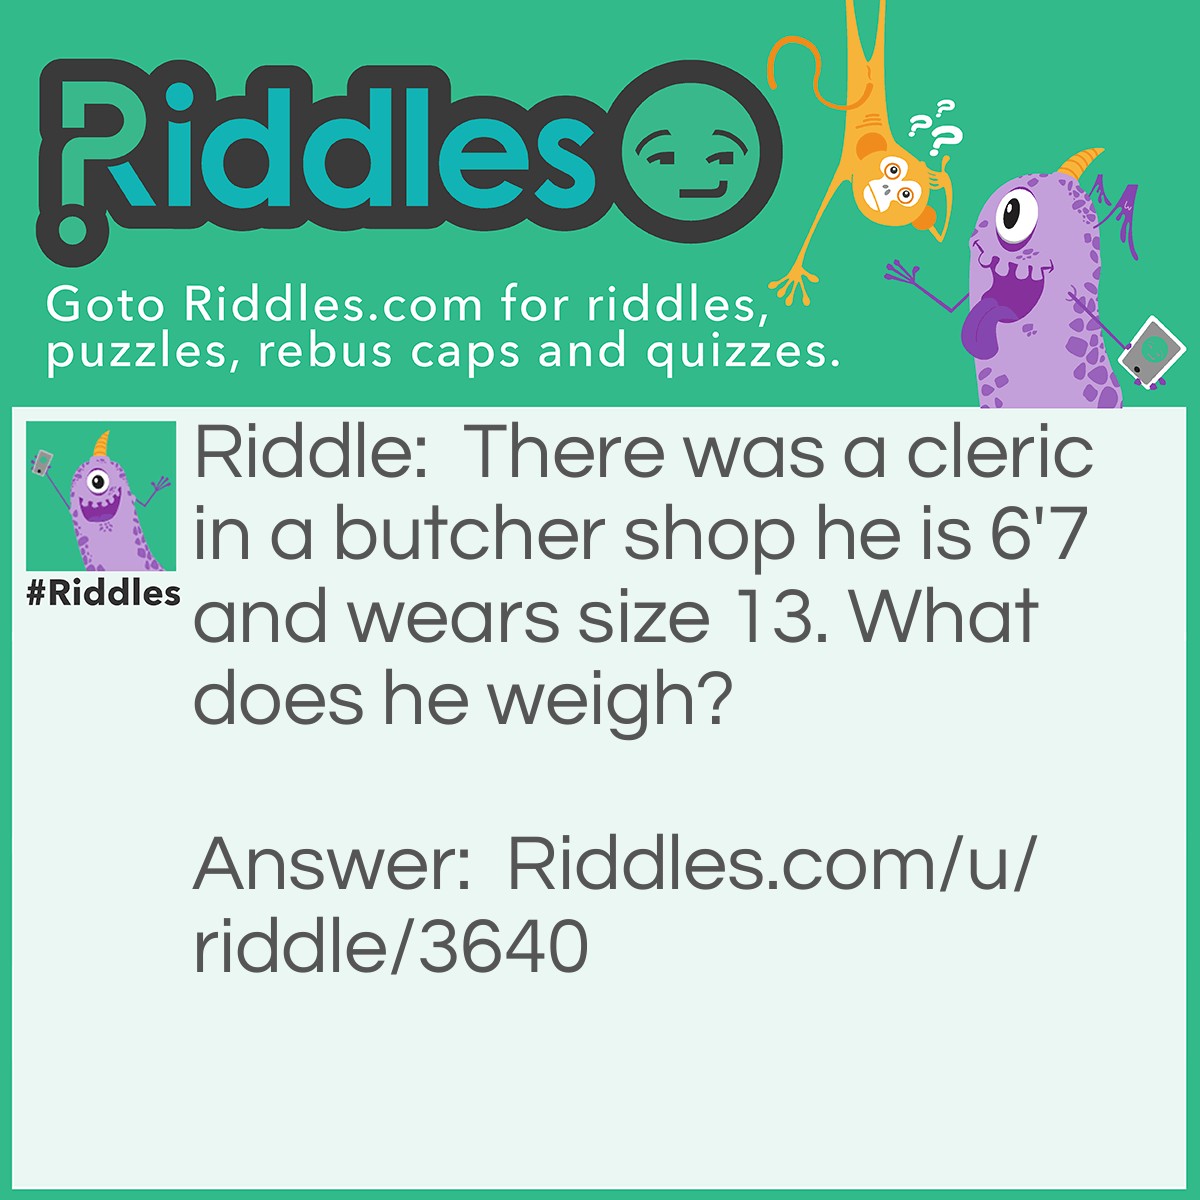 Riddle: There was a cleric in a butcher shop he is 6'7 and wears size 13. What does he weigh? Answer: Meat.